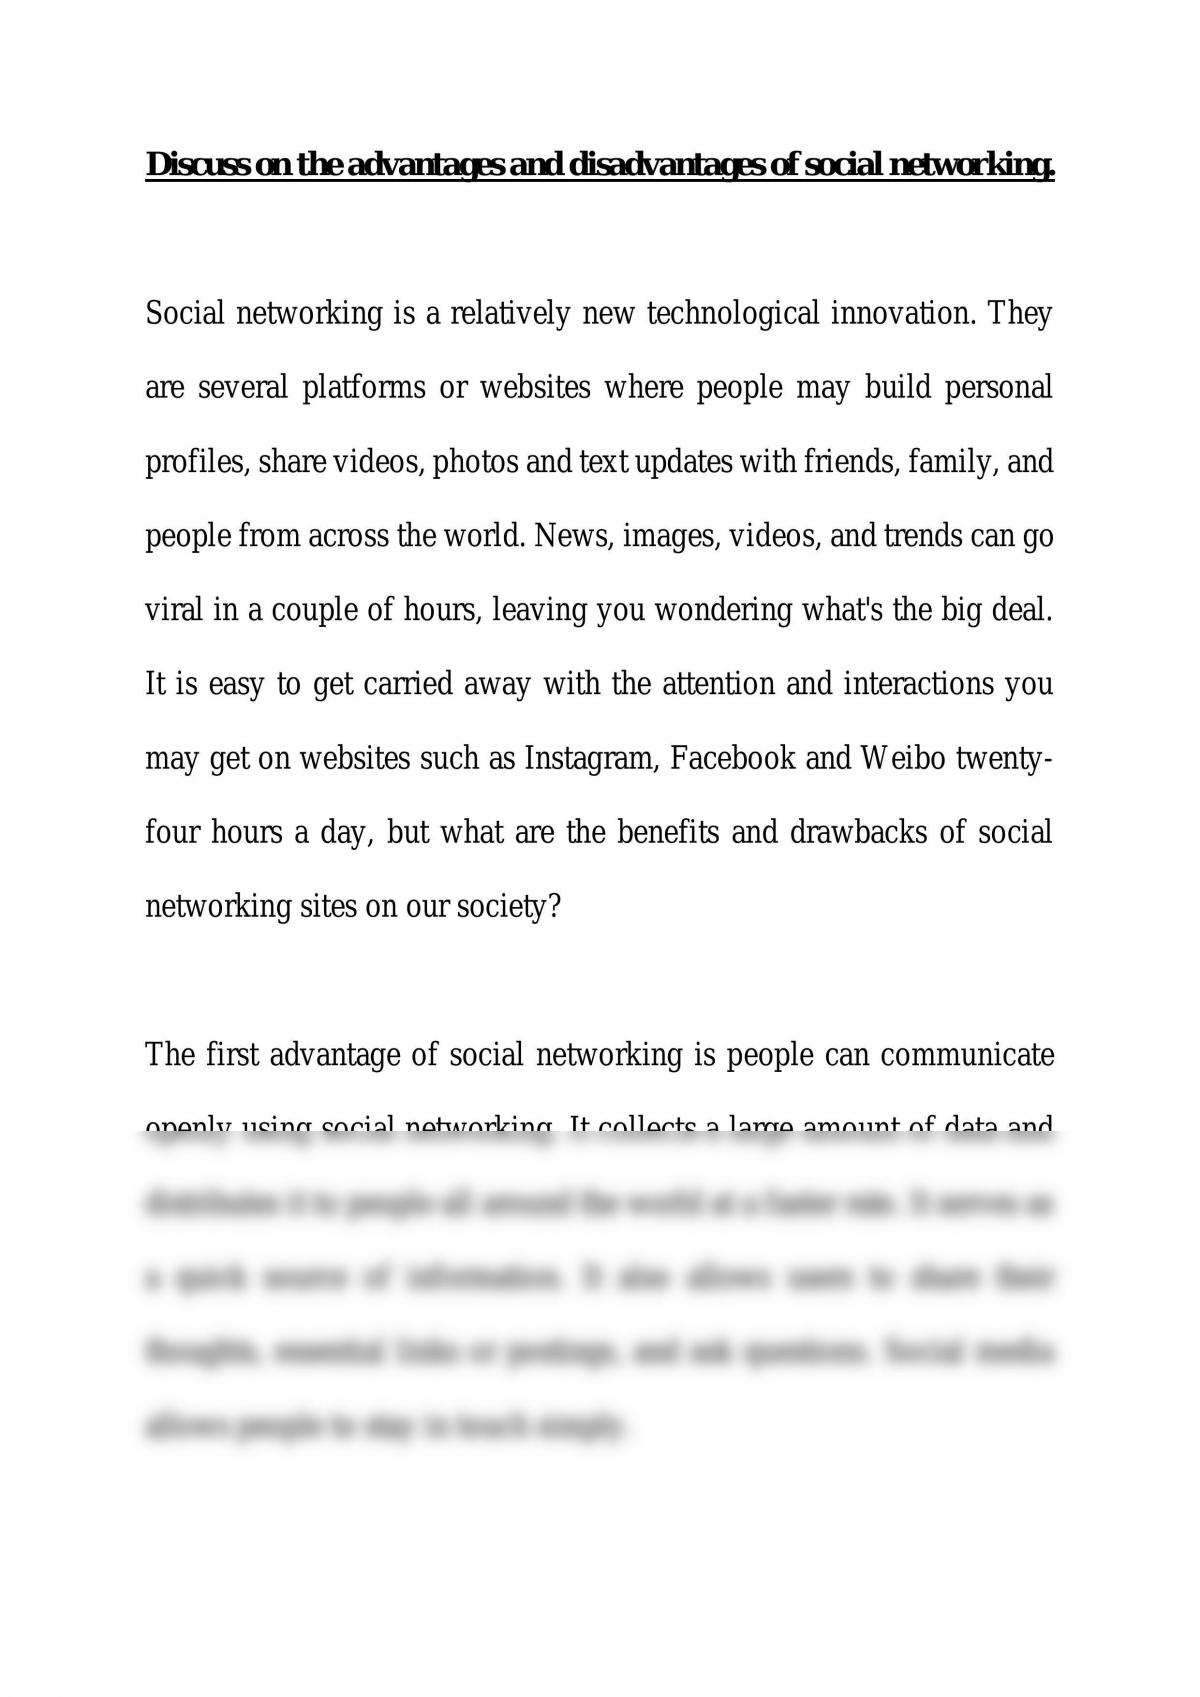 merits and demerits of social networking essay